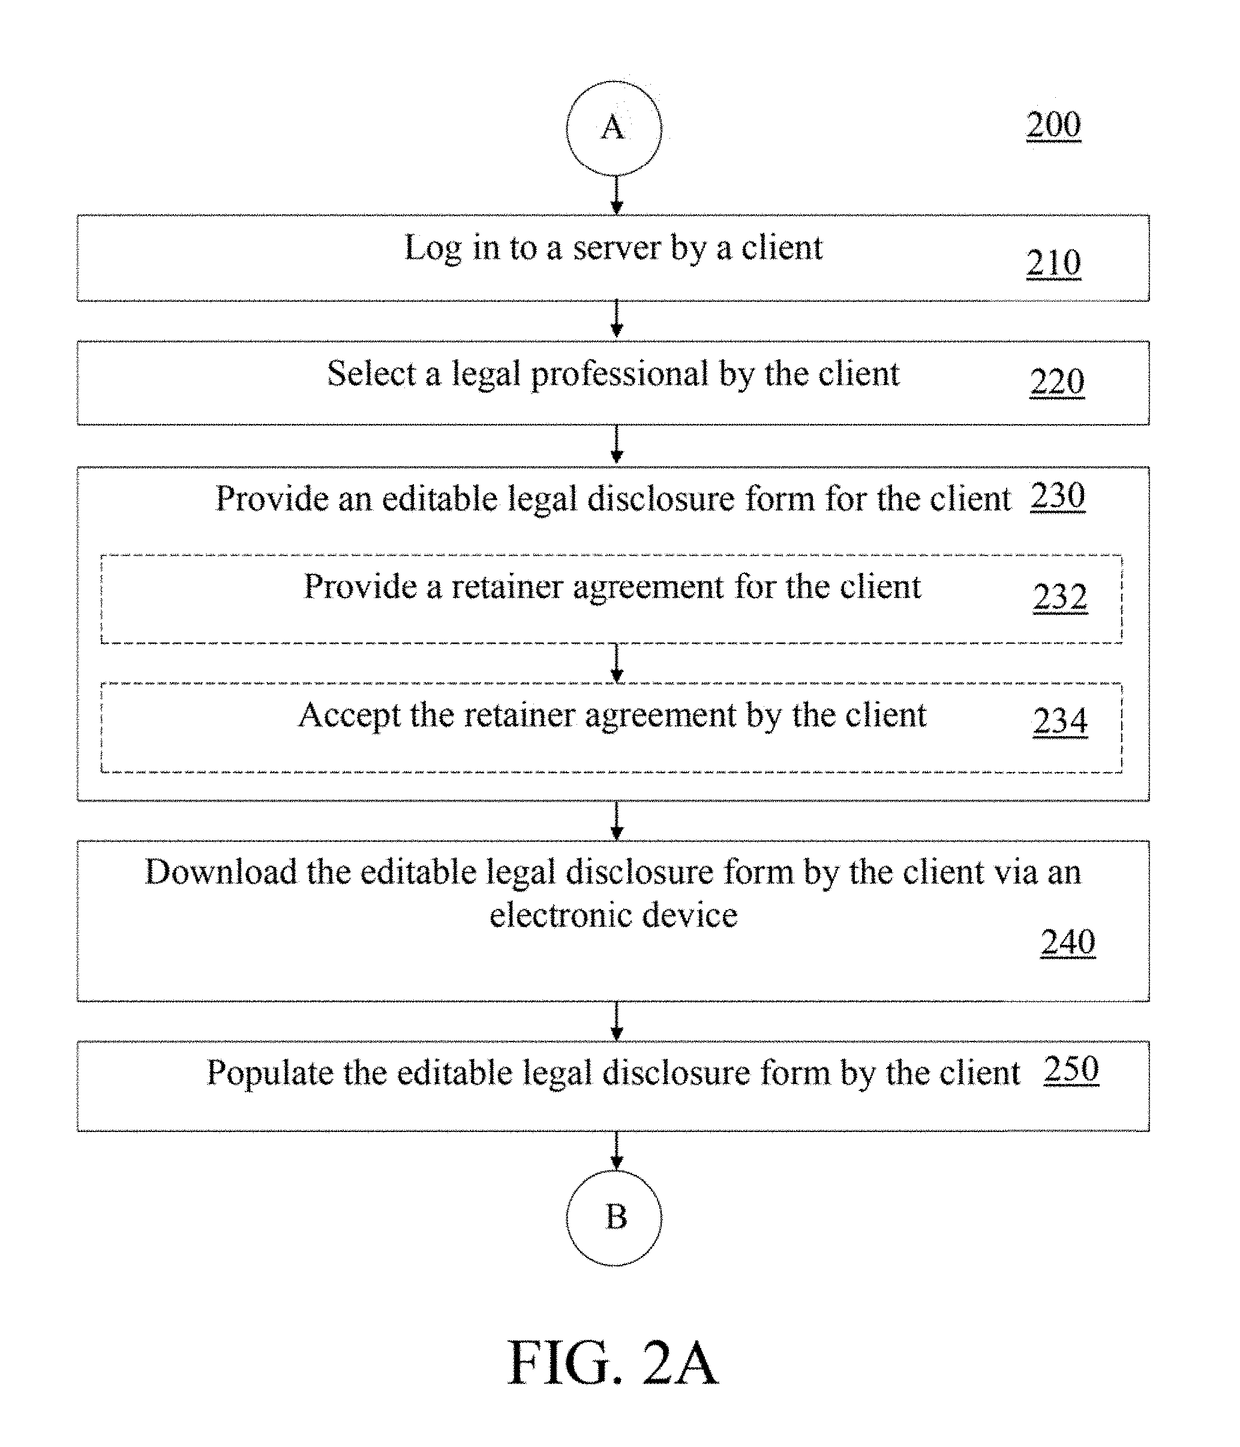 Method for Collecting and Populating Forms between a Client and a Legal Professional